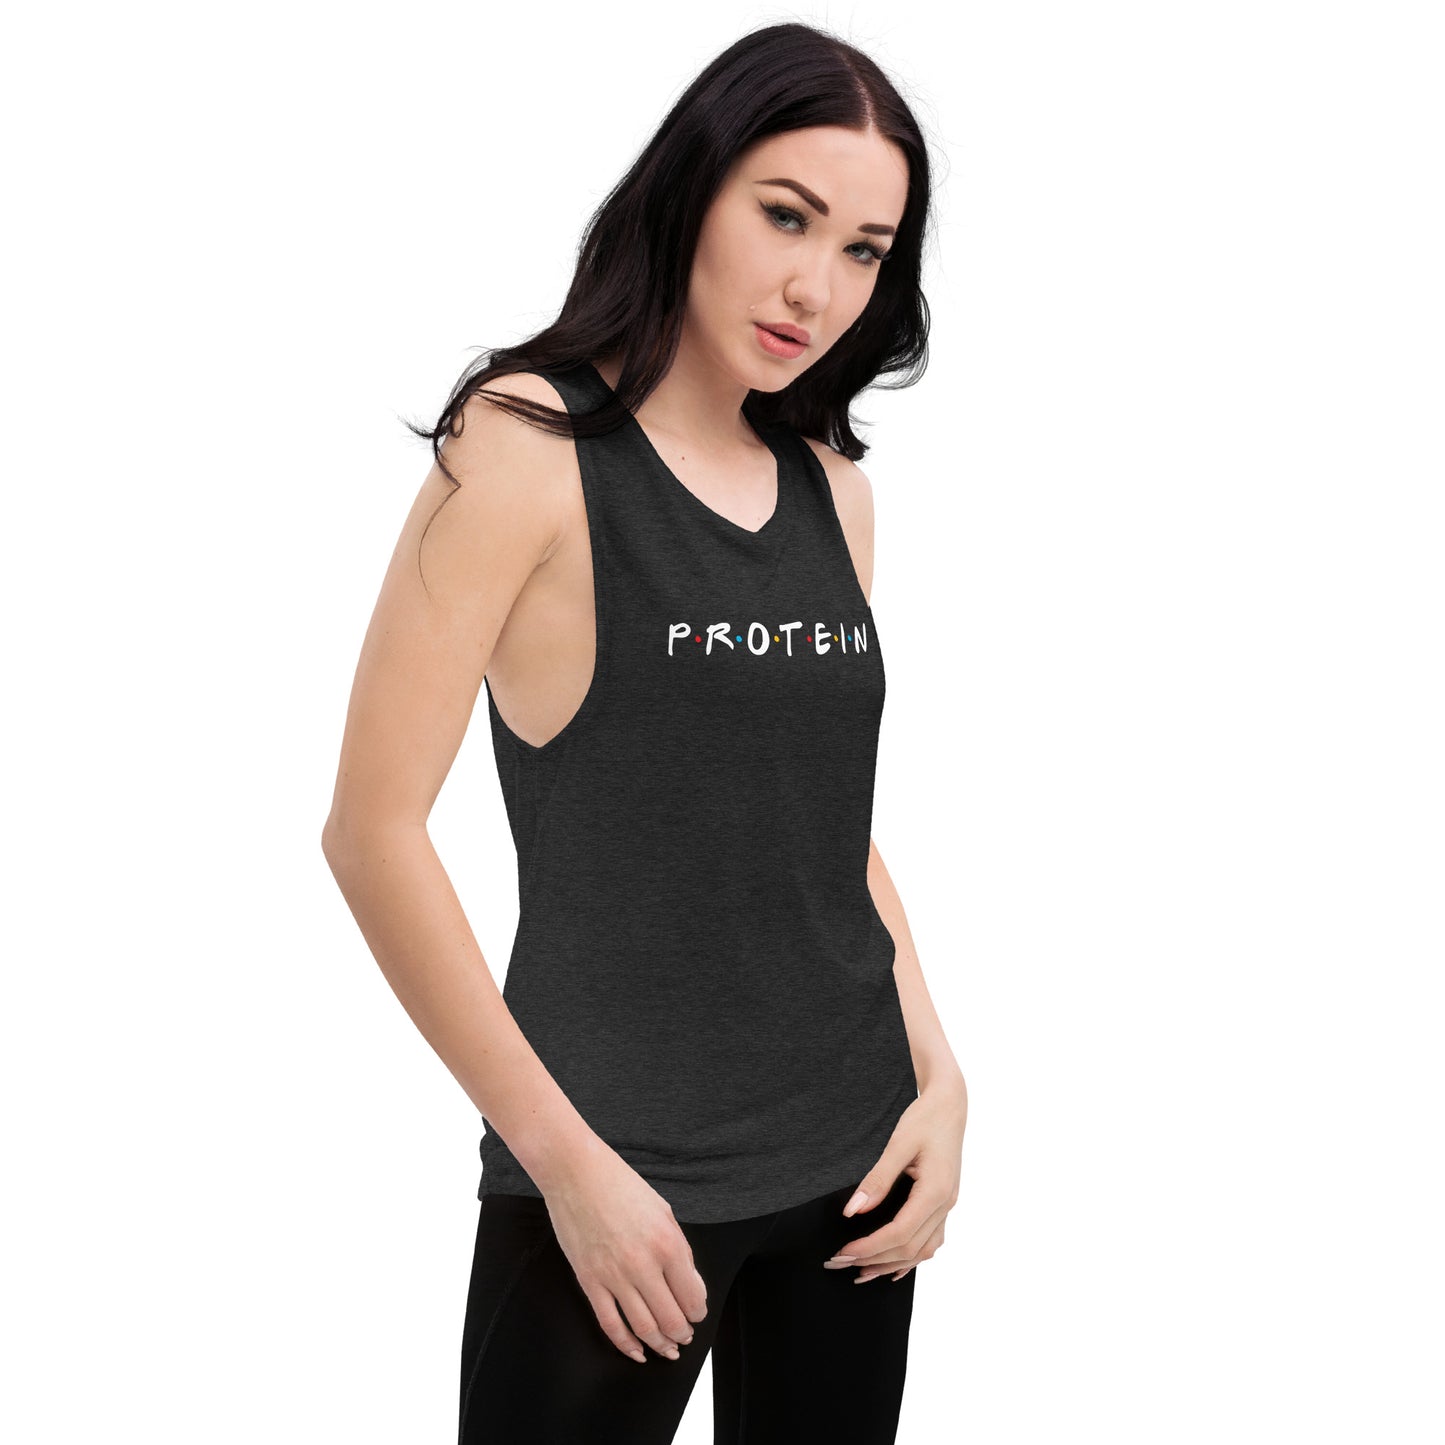 Protein is your Friend Ladies’ Muscle Tank